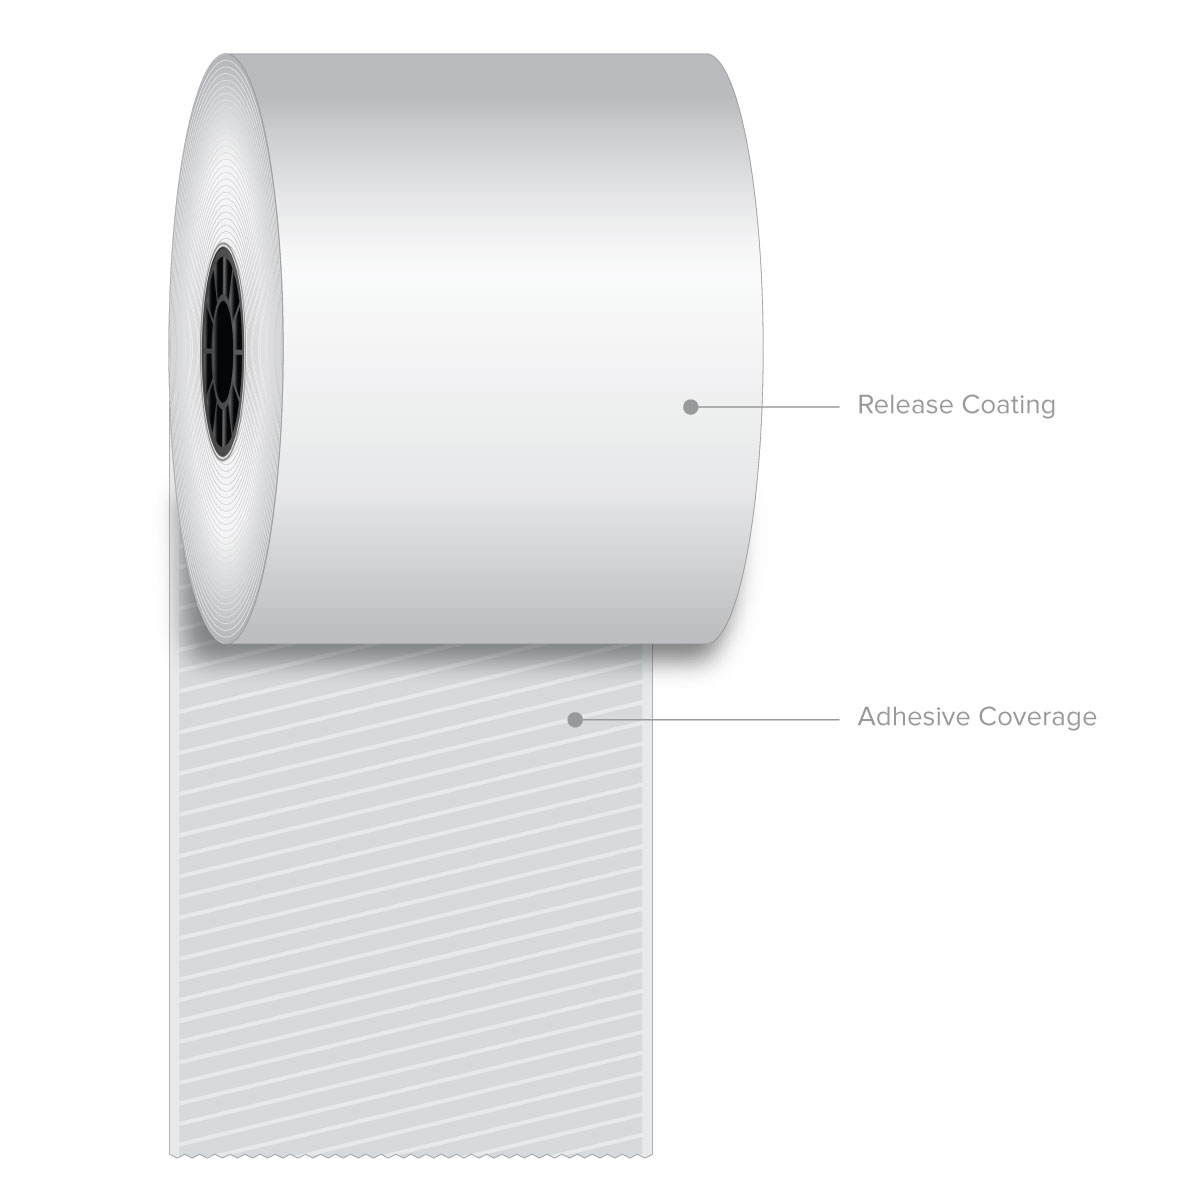 Re-Stick Thermal Paper Rolls